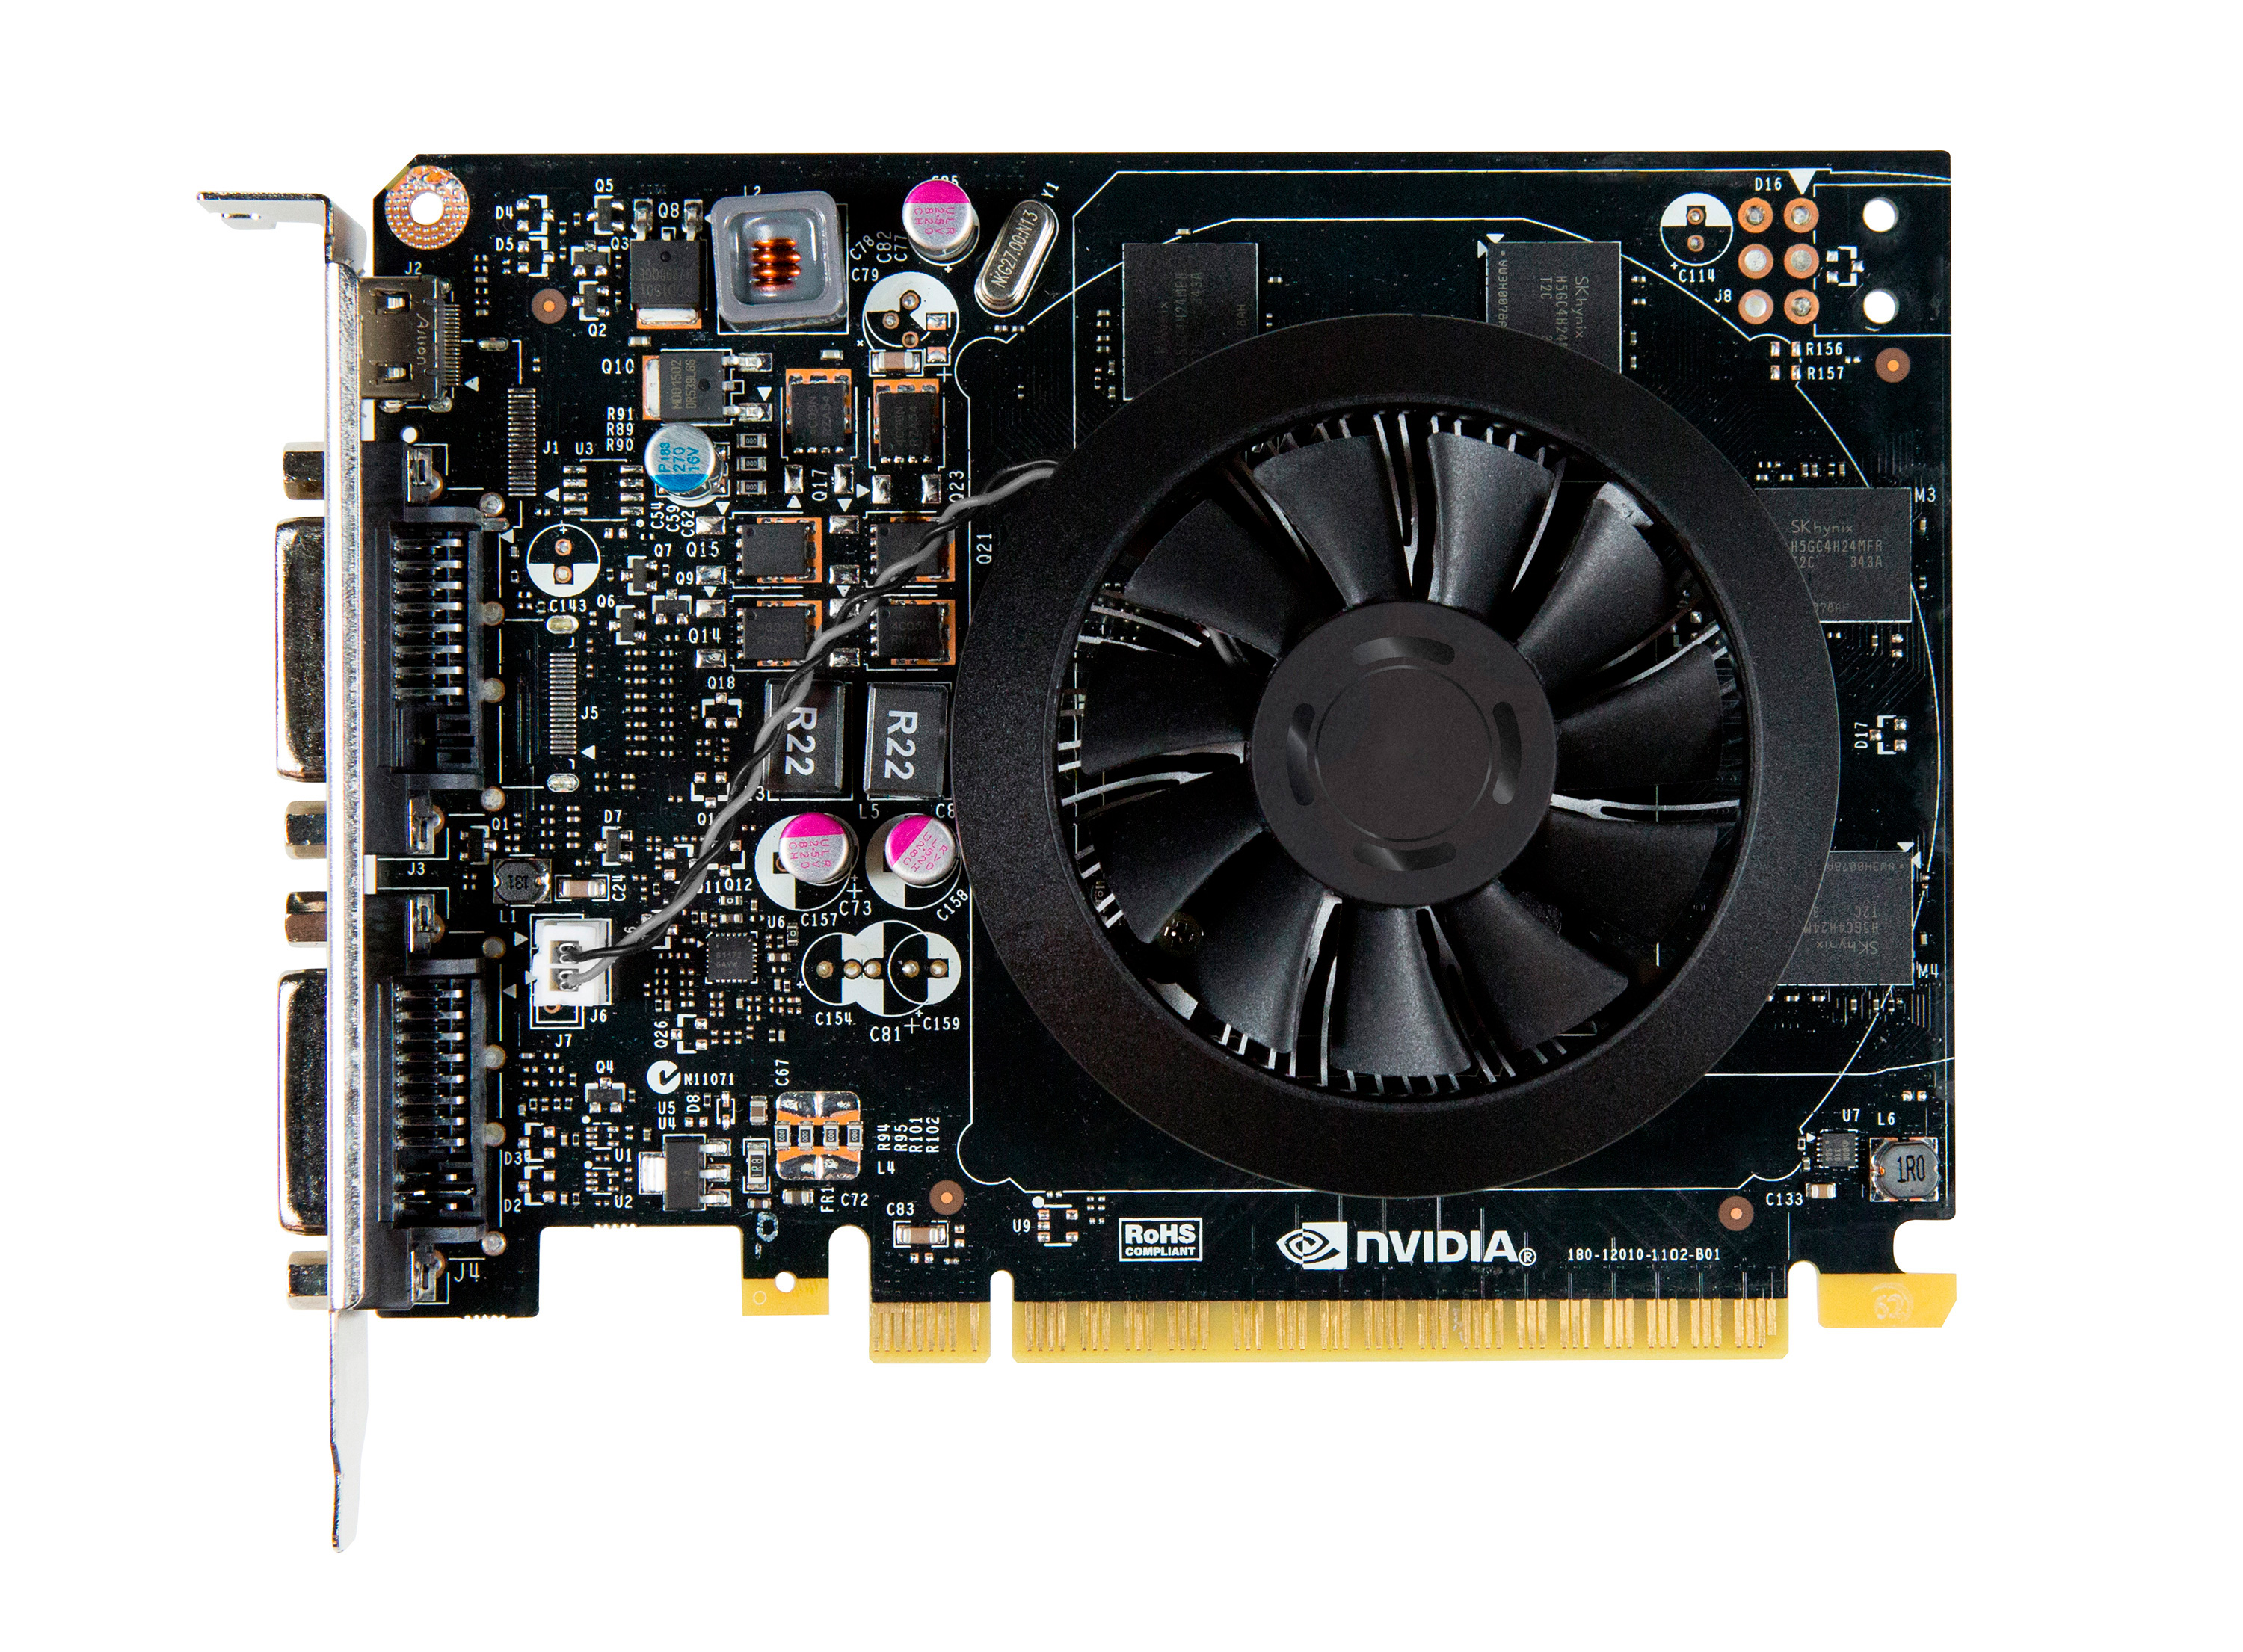 The NVIDIA GeForce GTX 980 Review: Maxwell Mark 2